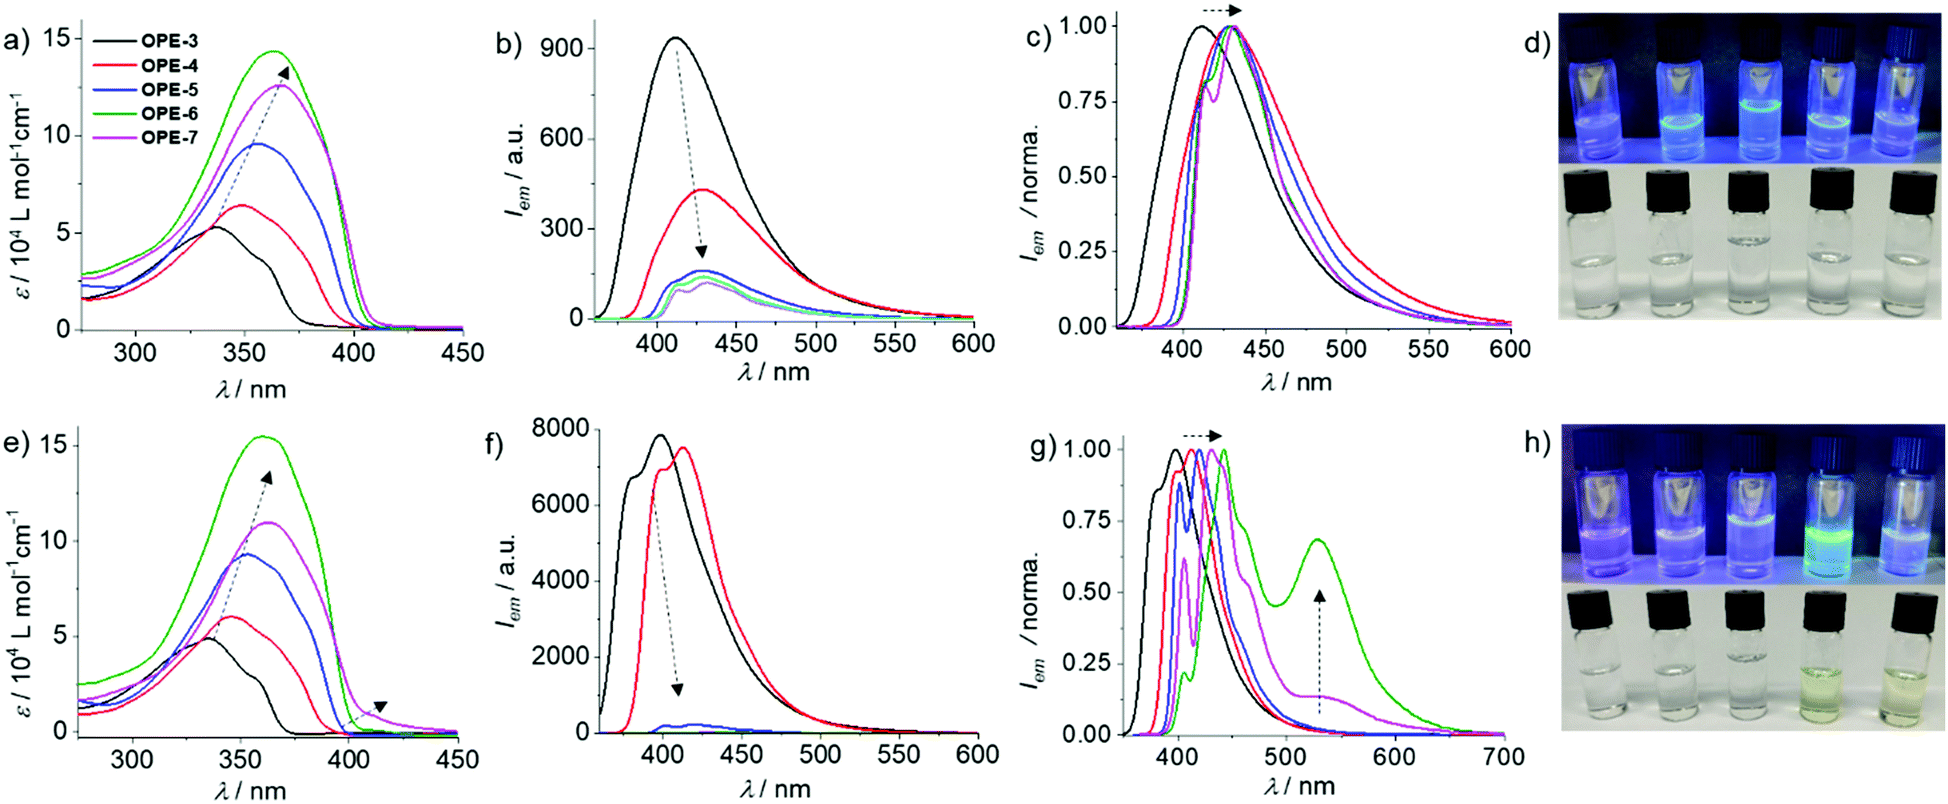 Bliv ophidset Tragisk Peck Understanding the role of conjugation length on the self-assembly behaviour  of oligophenyleneethynylenes - Chemical Communications (RSC Publishing)